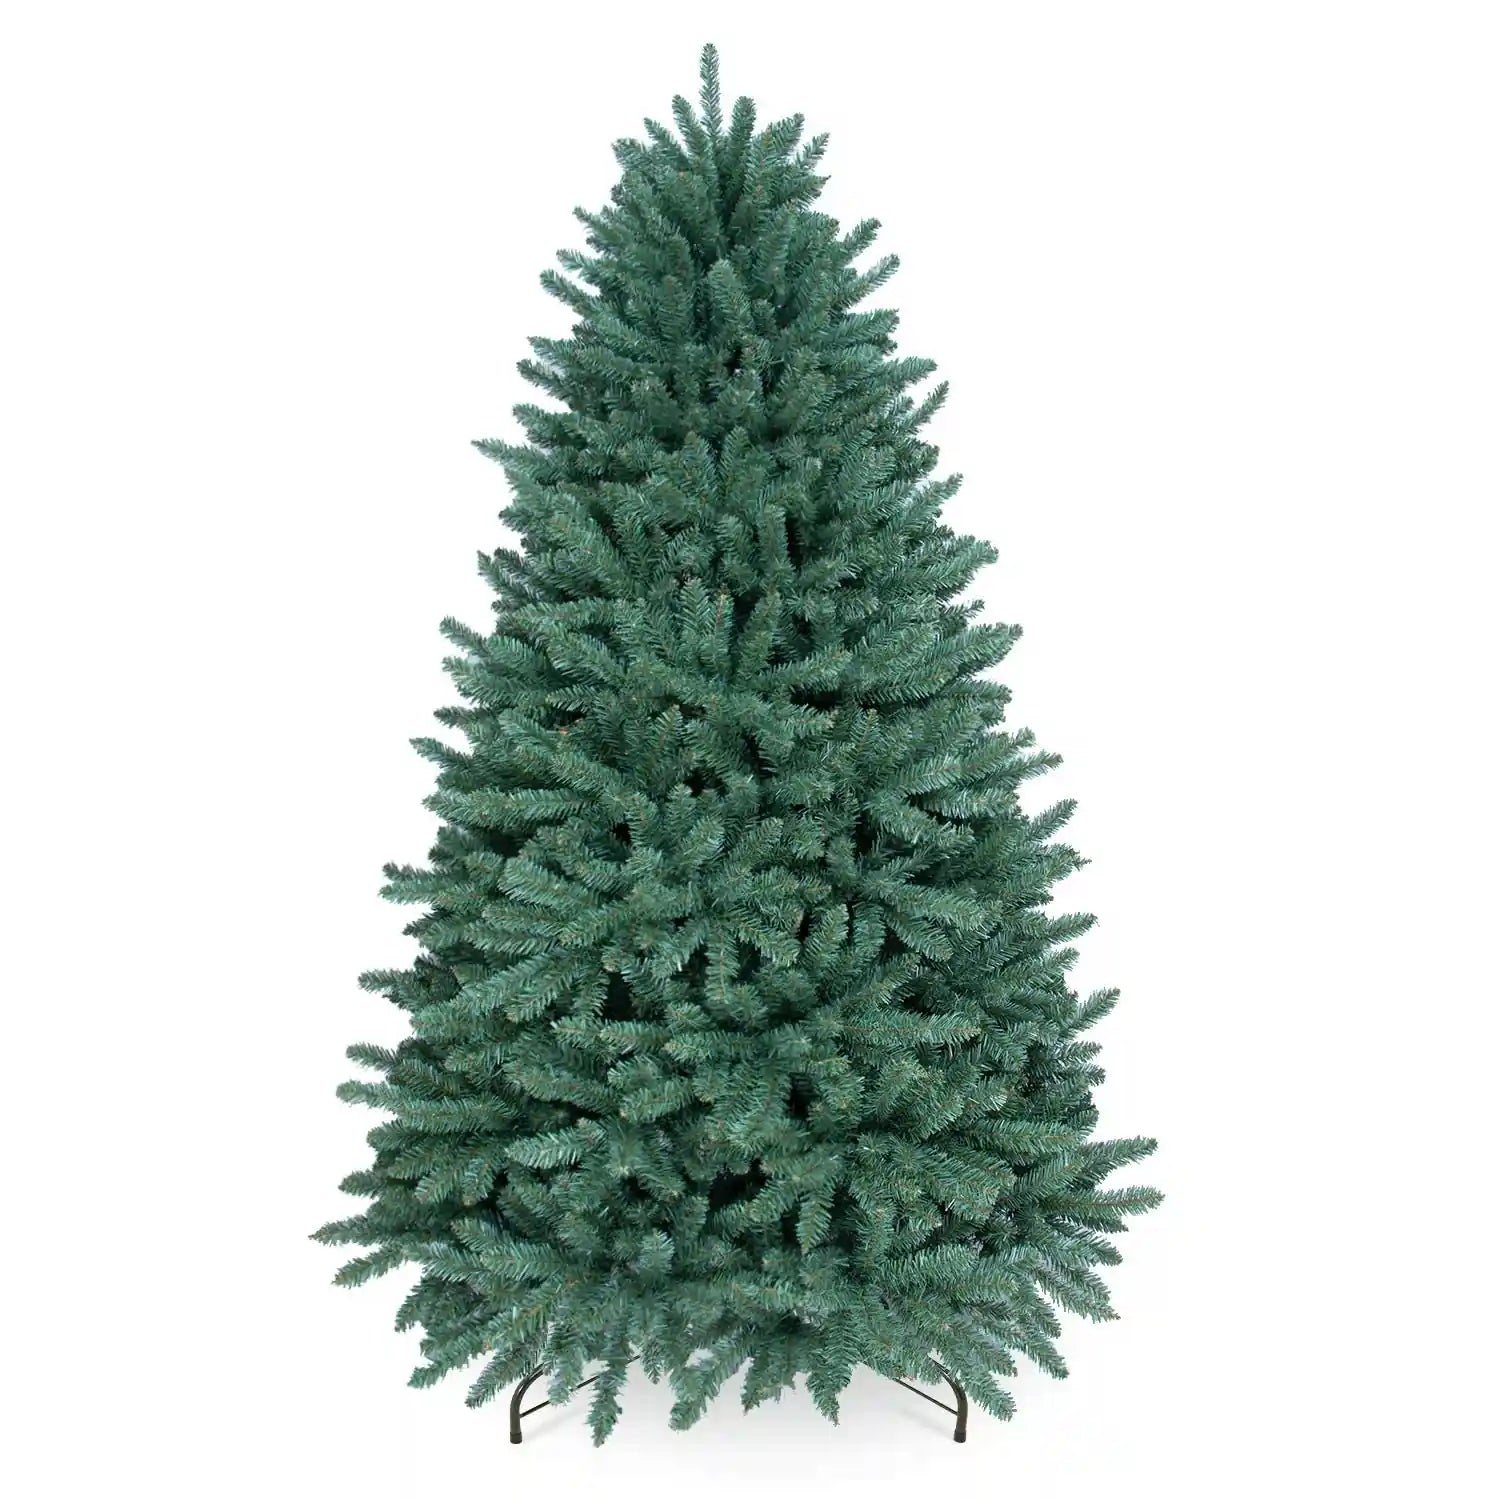 The 9 ft christmas tree#size_9FT